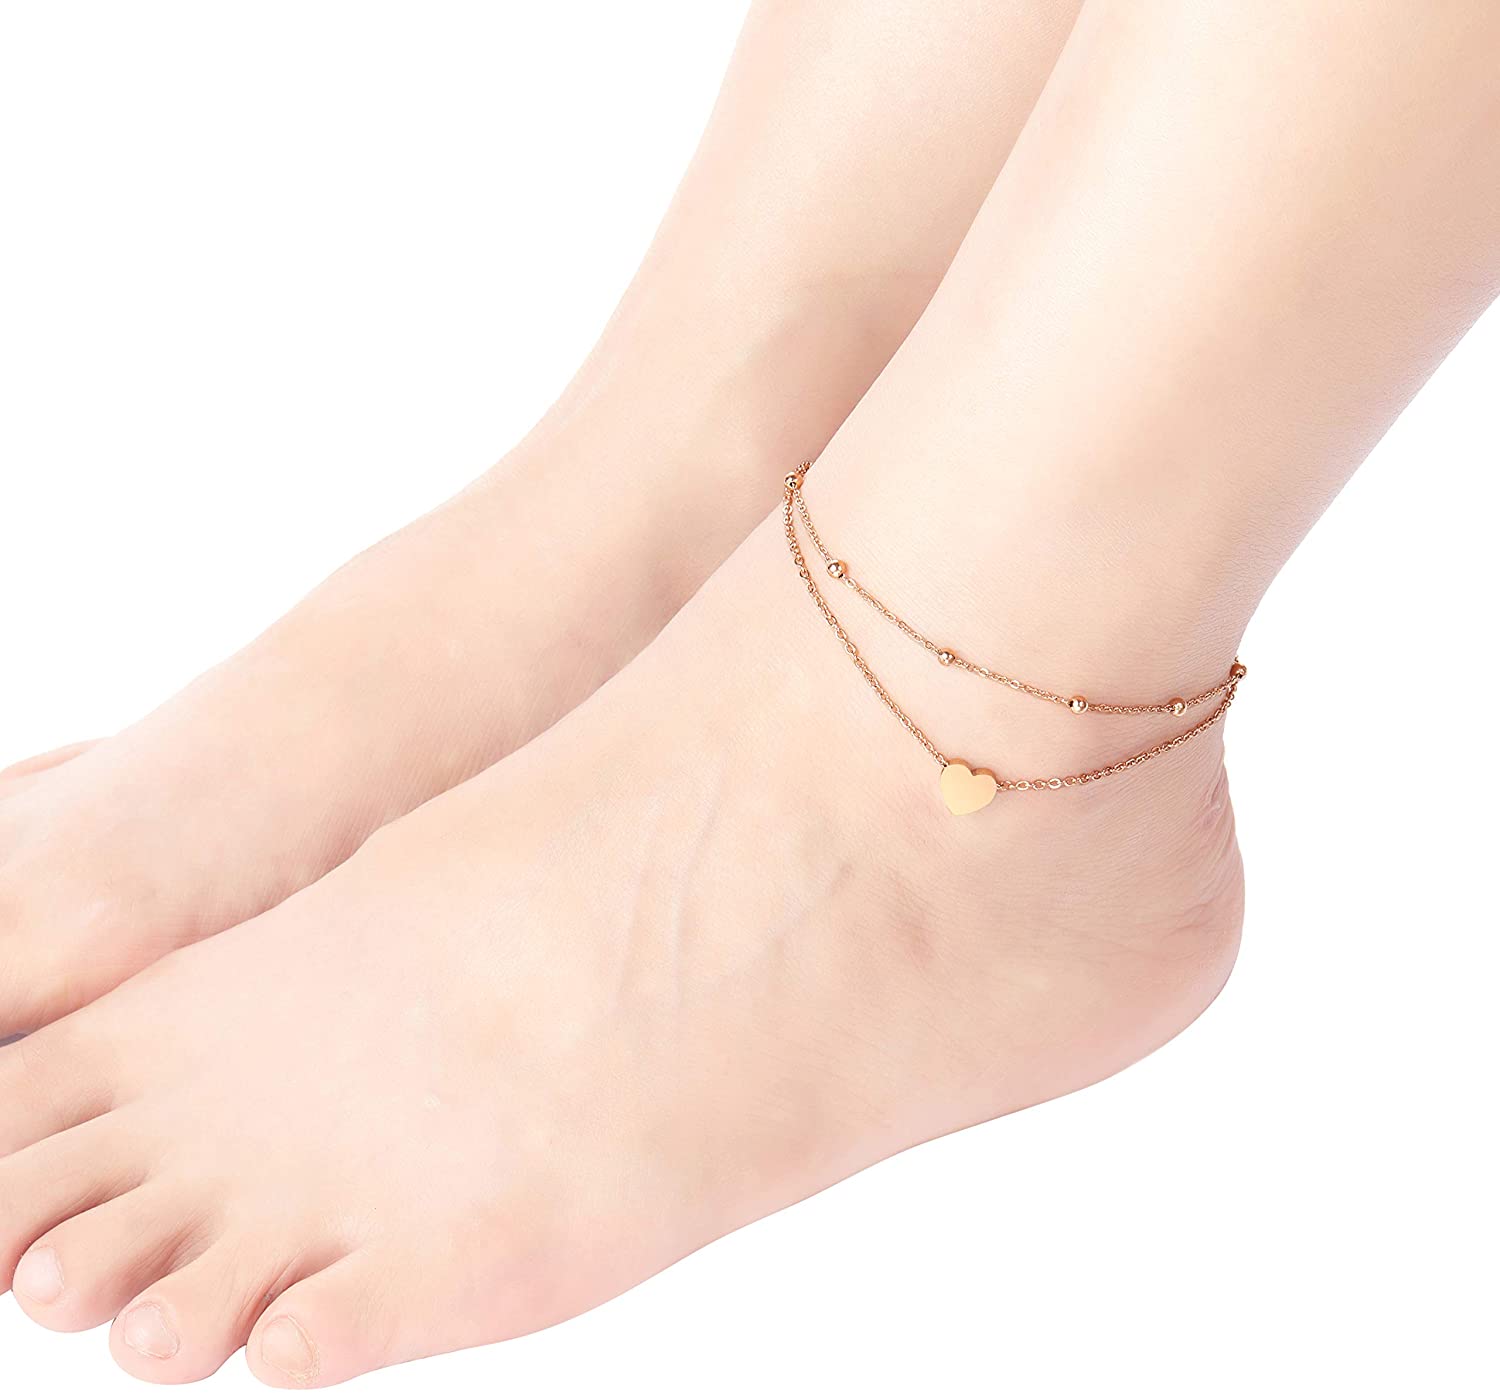 Anniversary Valentines Mothers Christmas Day Gift 18K Rose Gold Love Heart Charm Bar Bangle Bracelet Link Chain Anklet Fashion Beach Foot Sandal Jewelry Ankle Bracelet for Womens Birthday Anklets Women